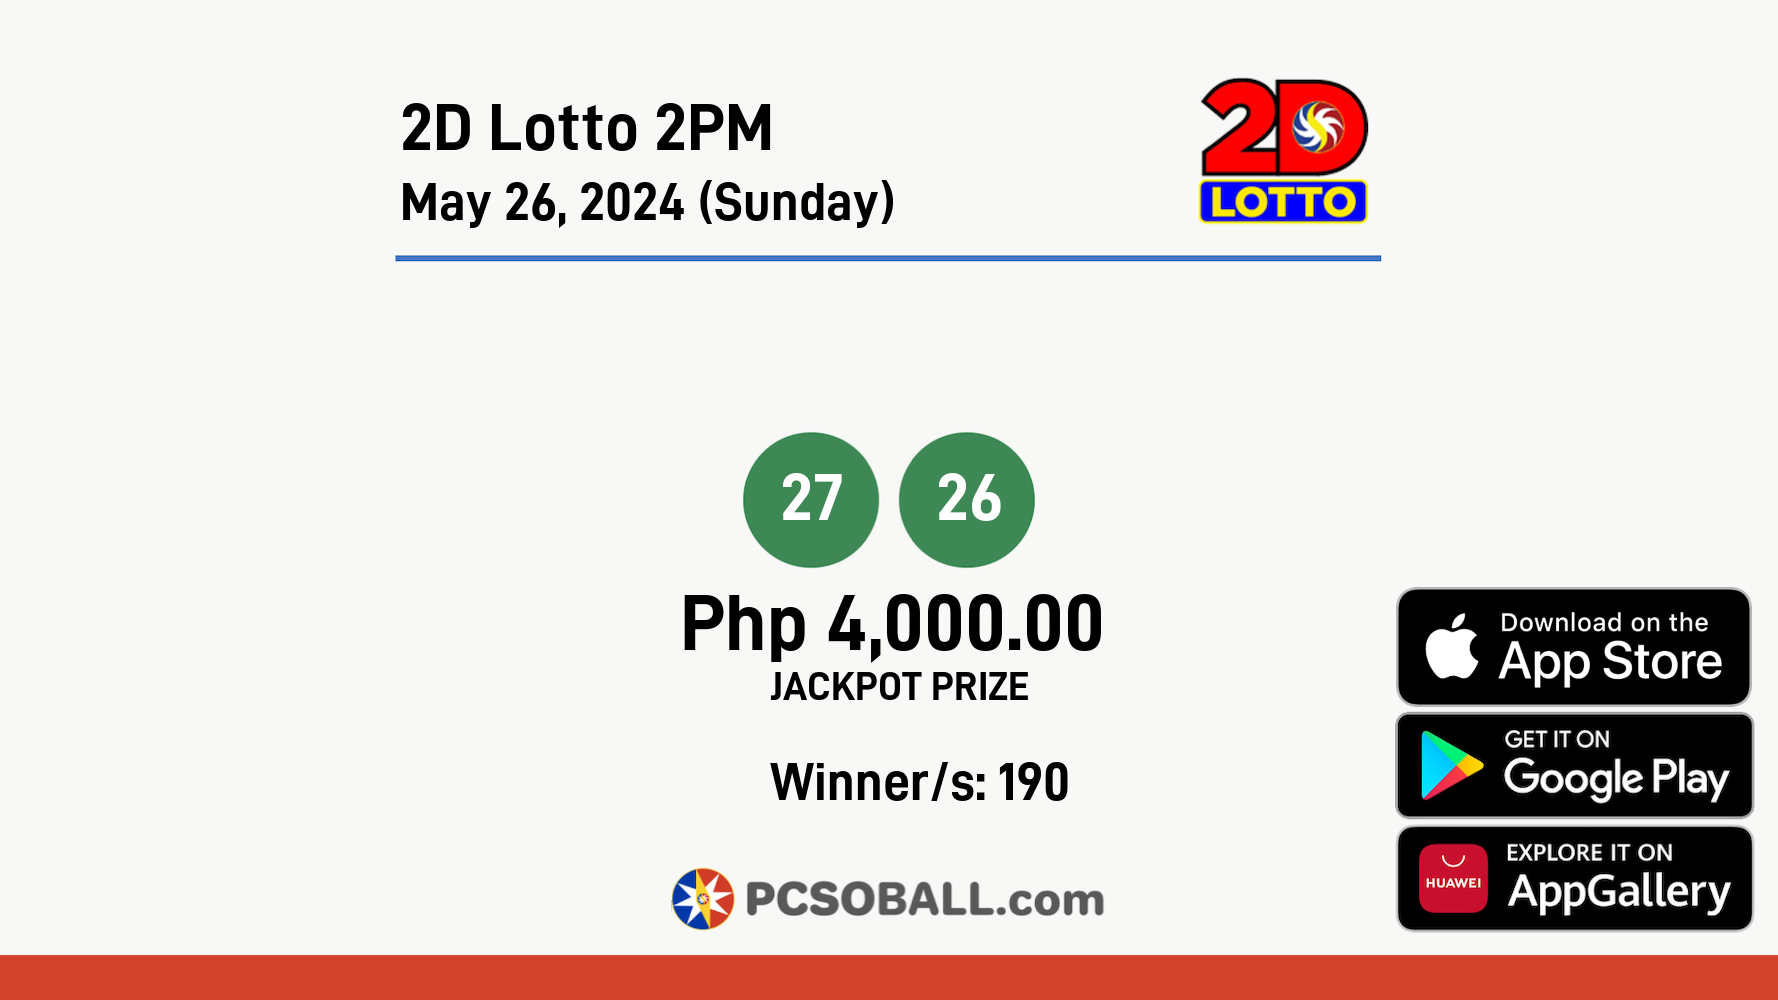 2D Lotto 2PM May 26, 2024 (Sunday) Result